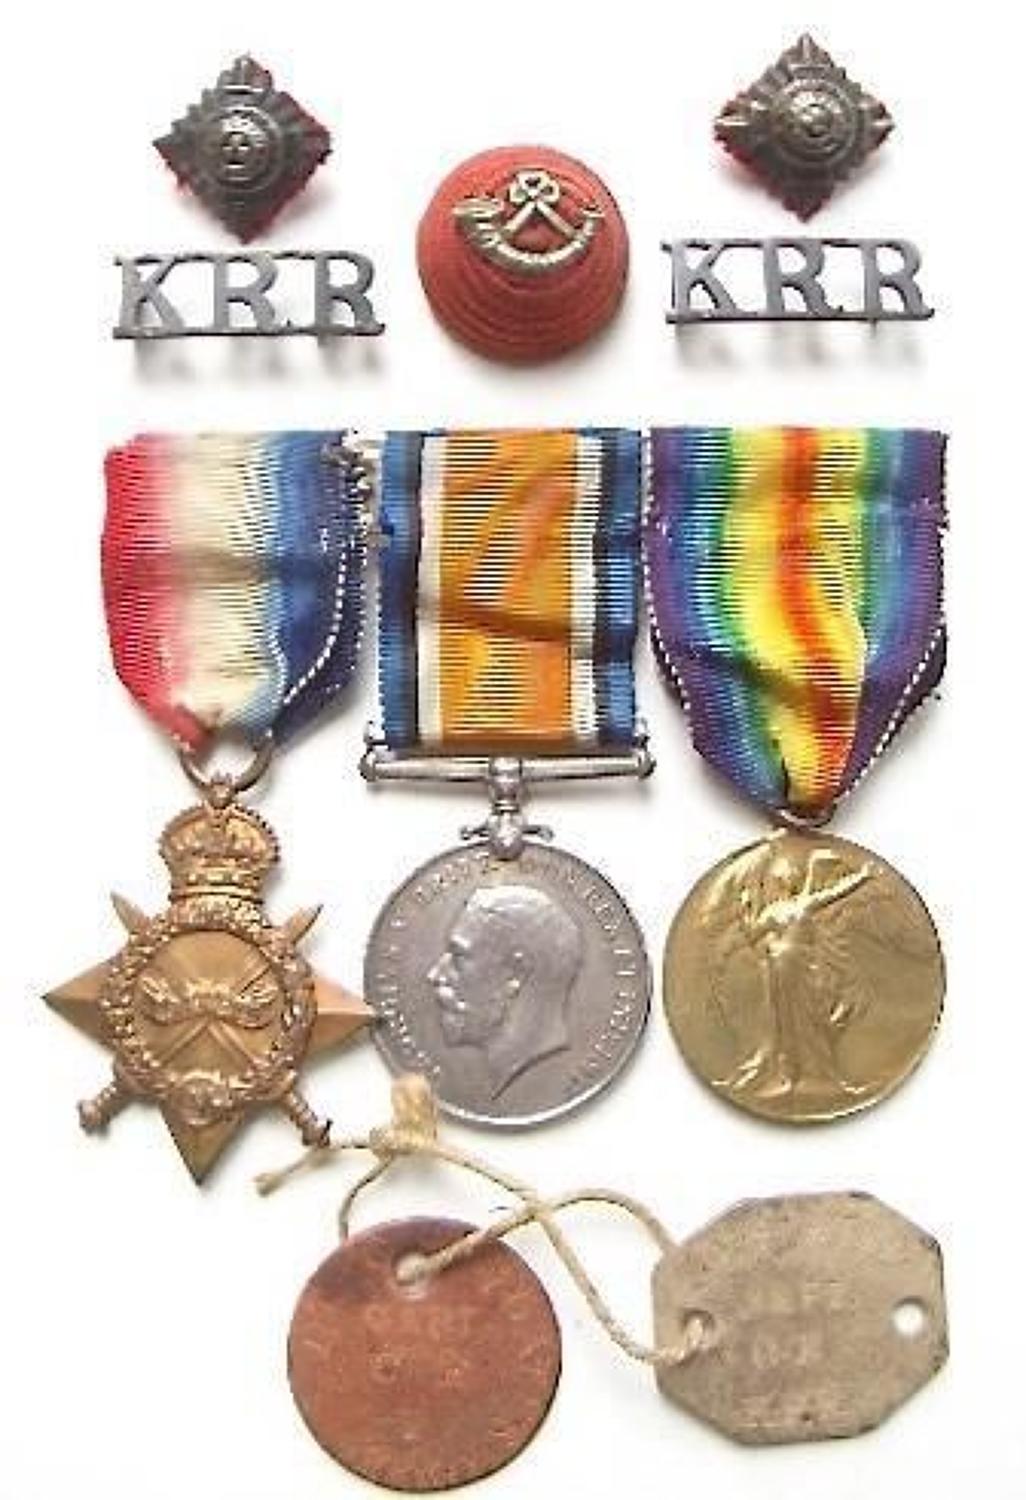 WW1 Kings Royal Rifle Corps Officers Medals and Badges.